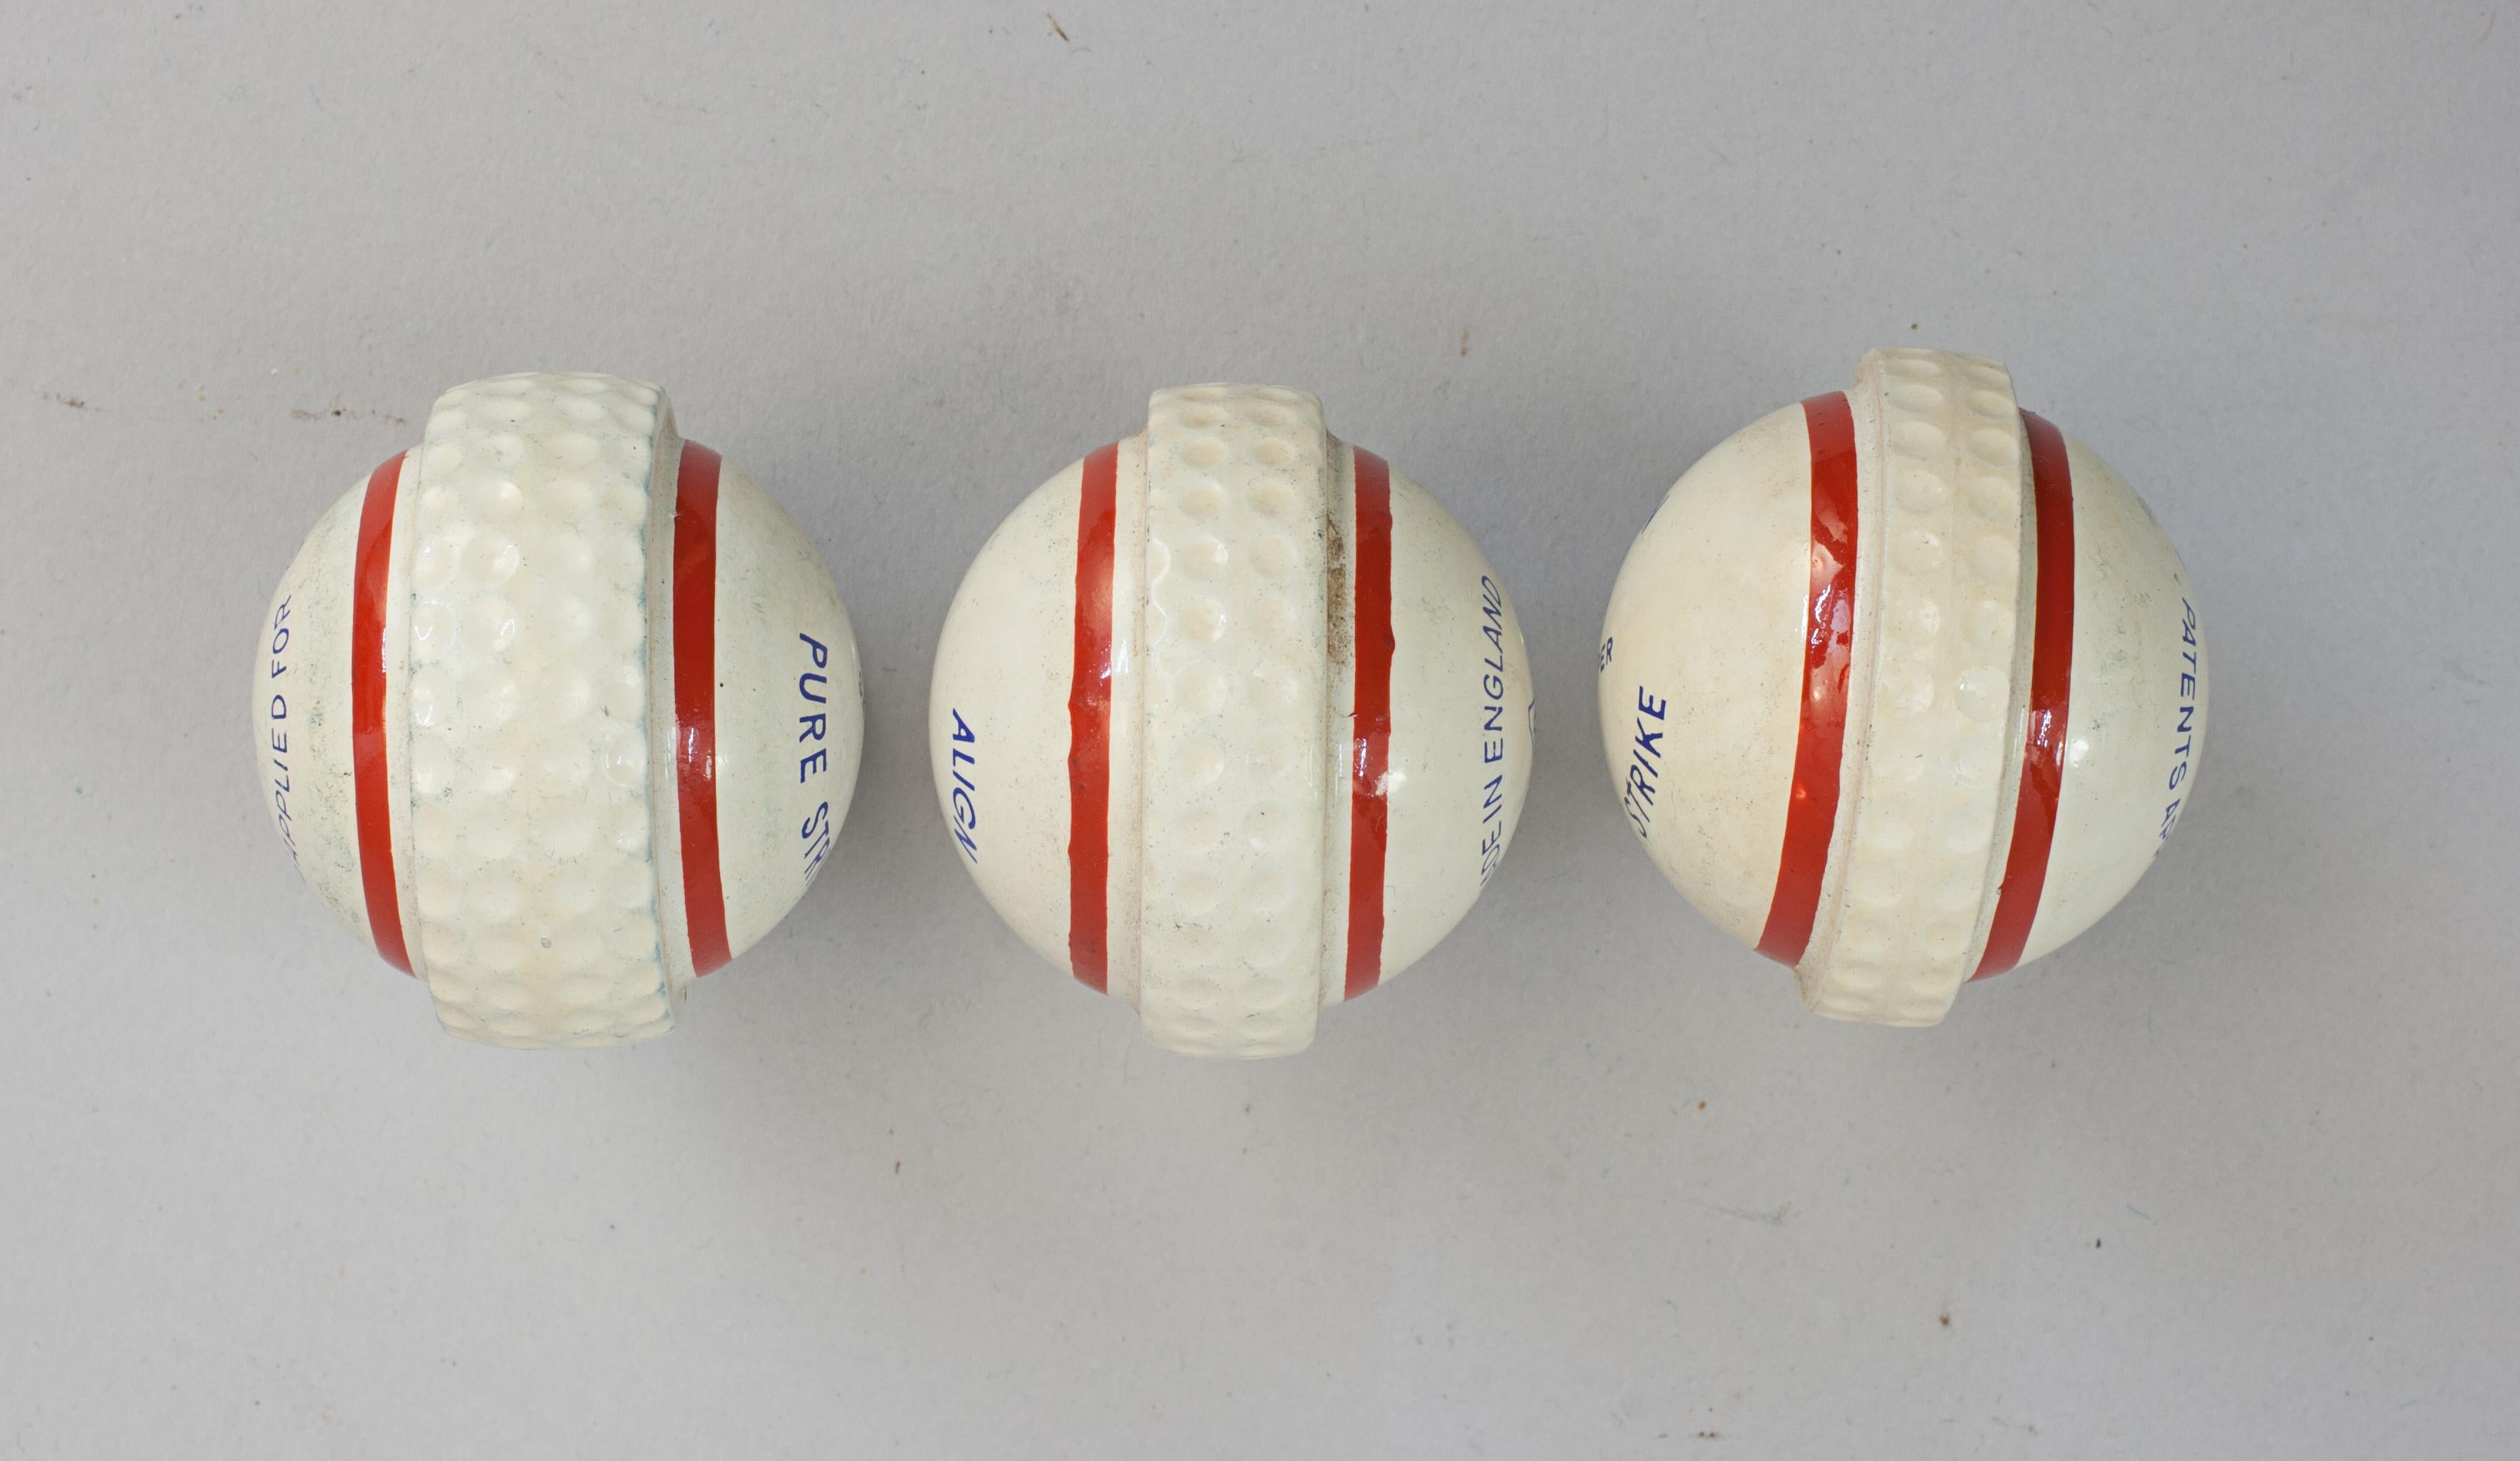 Align Pure Strike Practice Putting Golf Balls.
A set of three 'Align Pure Strike' practice putting golf balls in excellent condition. The balls had the approval of Open Champion Bob Charles, regarded by most as the greatest putter in the world. He